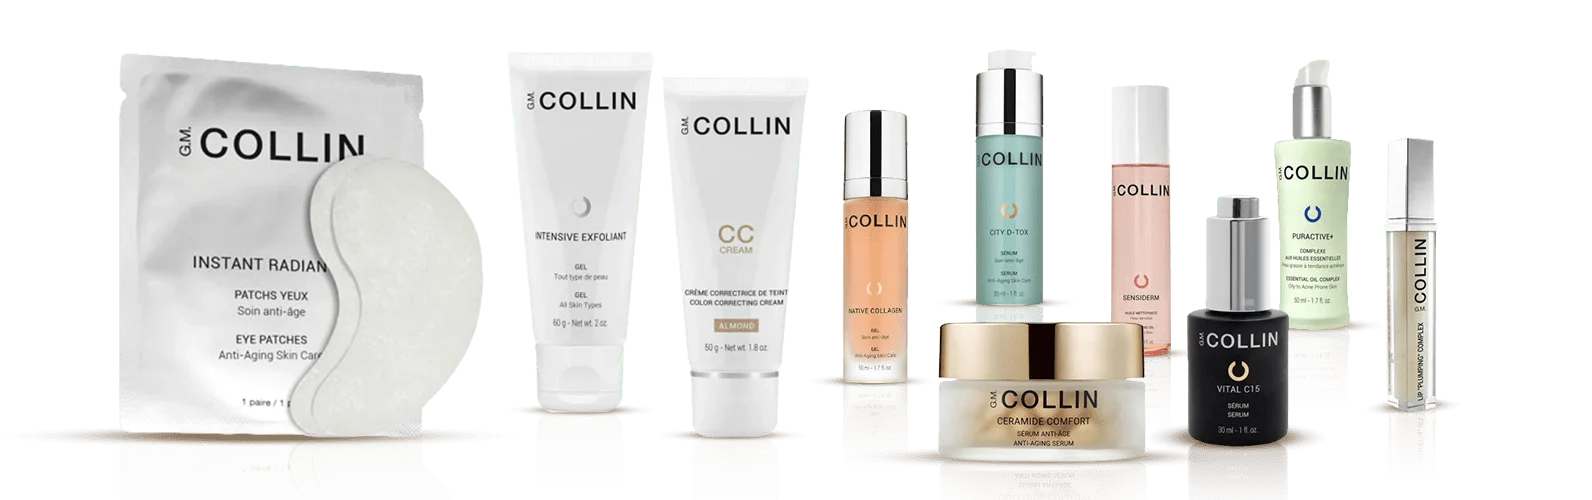 G.M. Collin Top 10 Esthetician Recommended Products